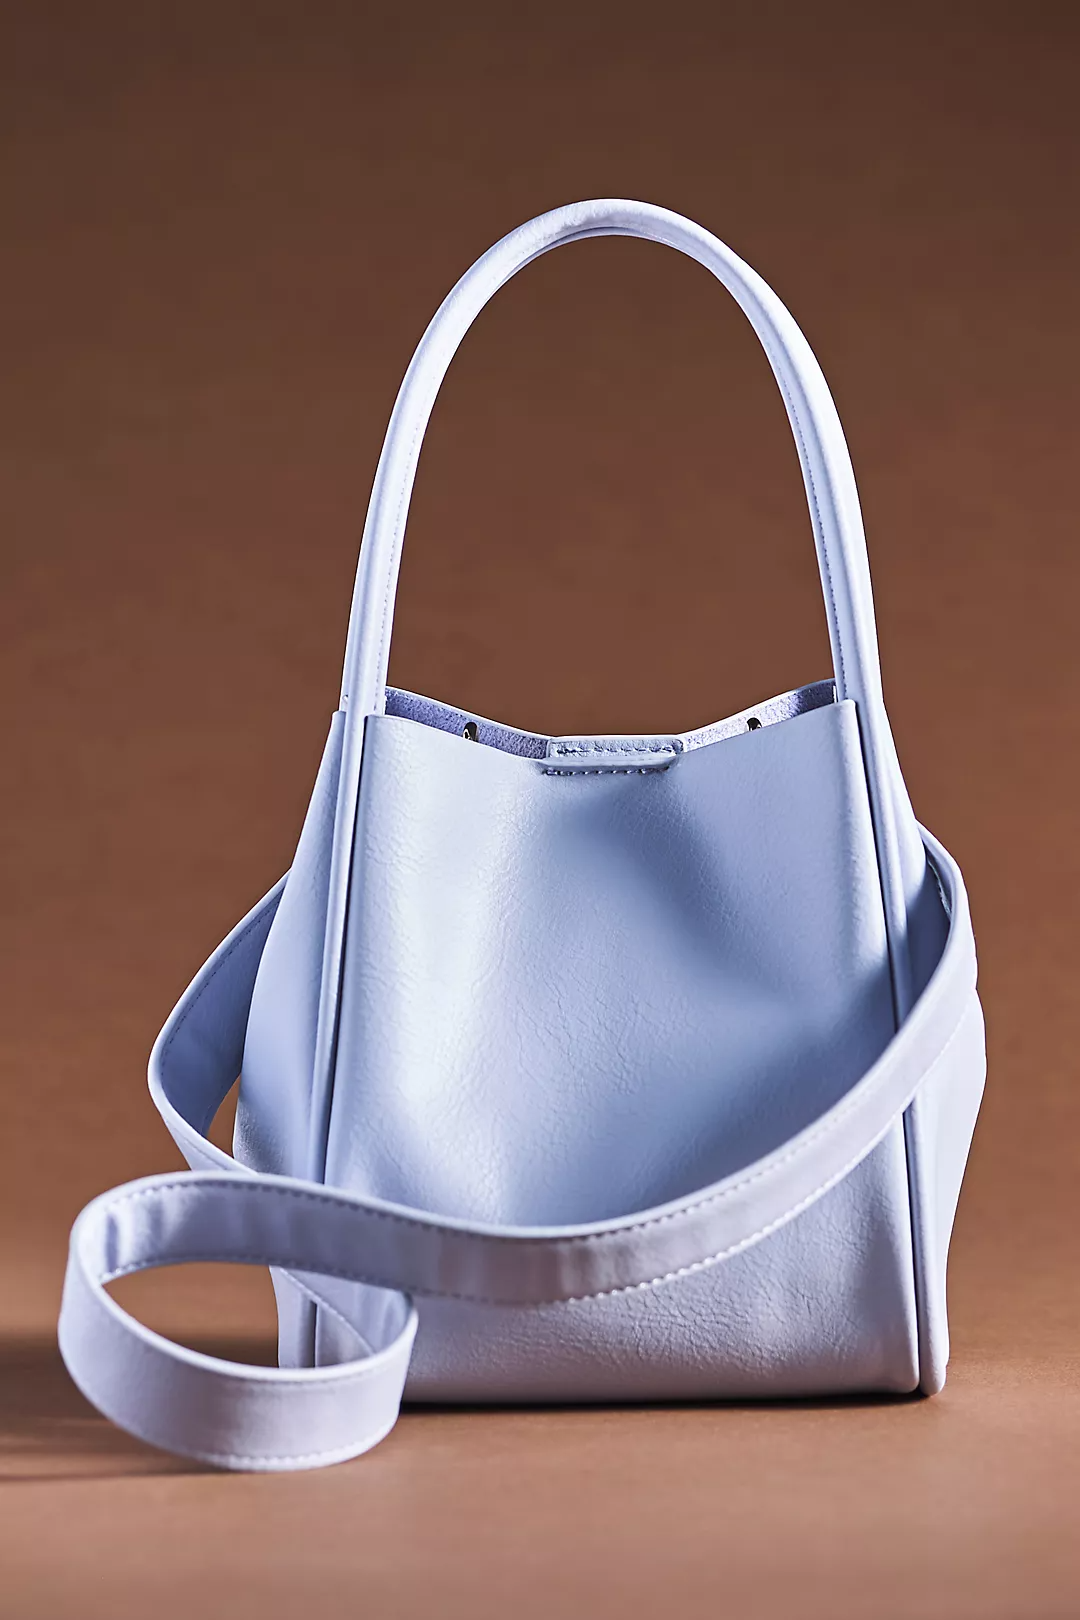 The Hollace Tote